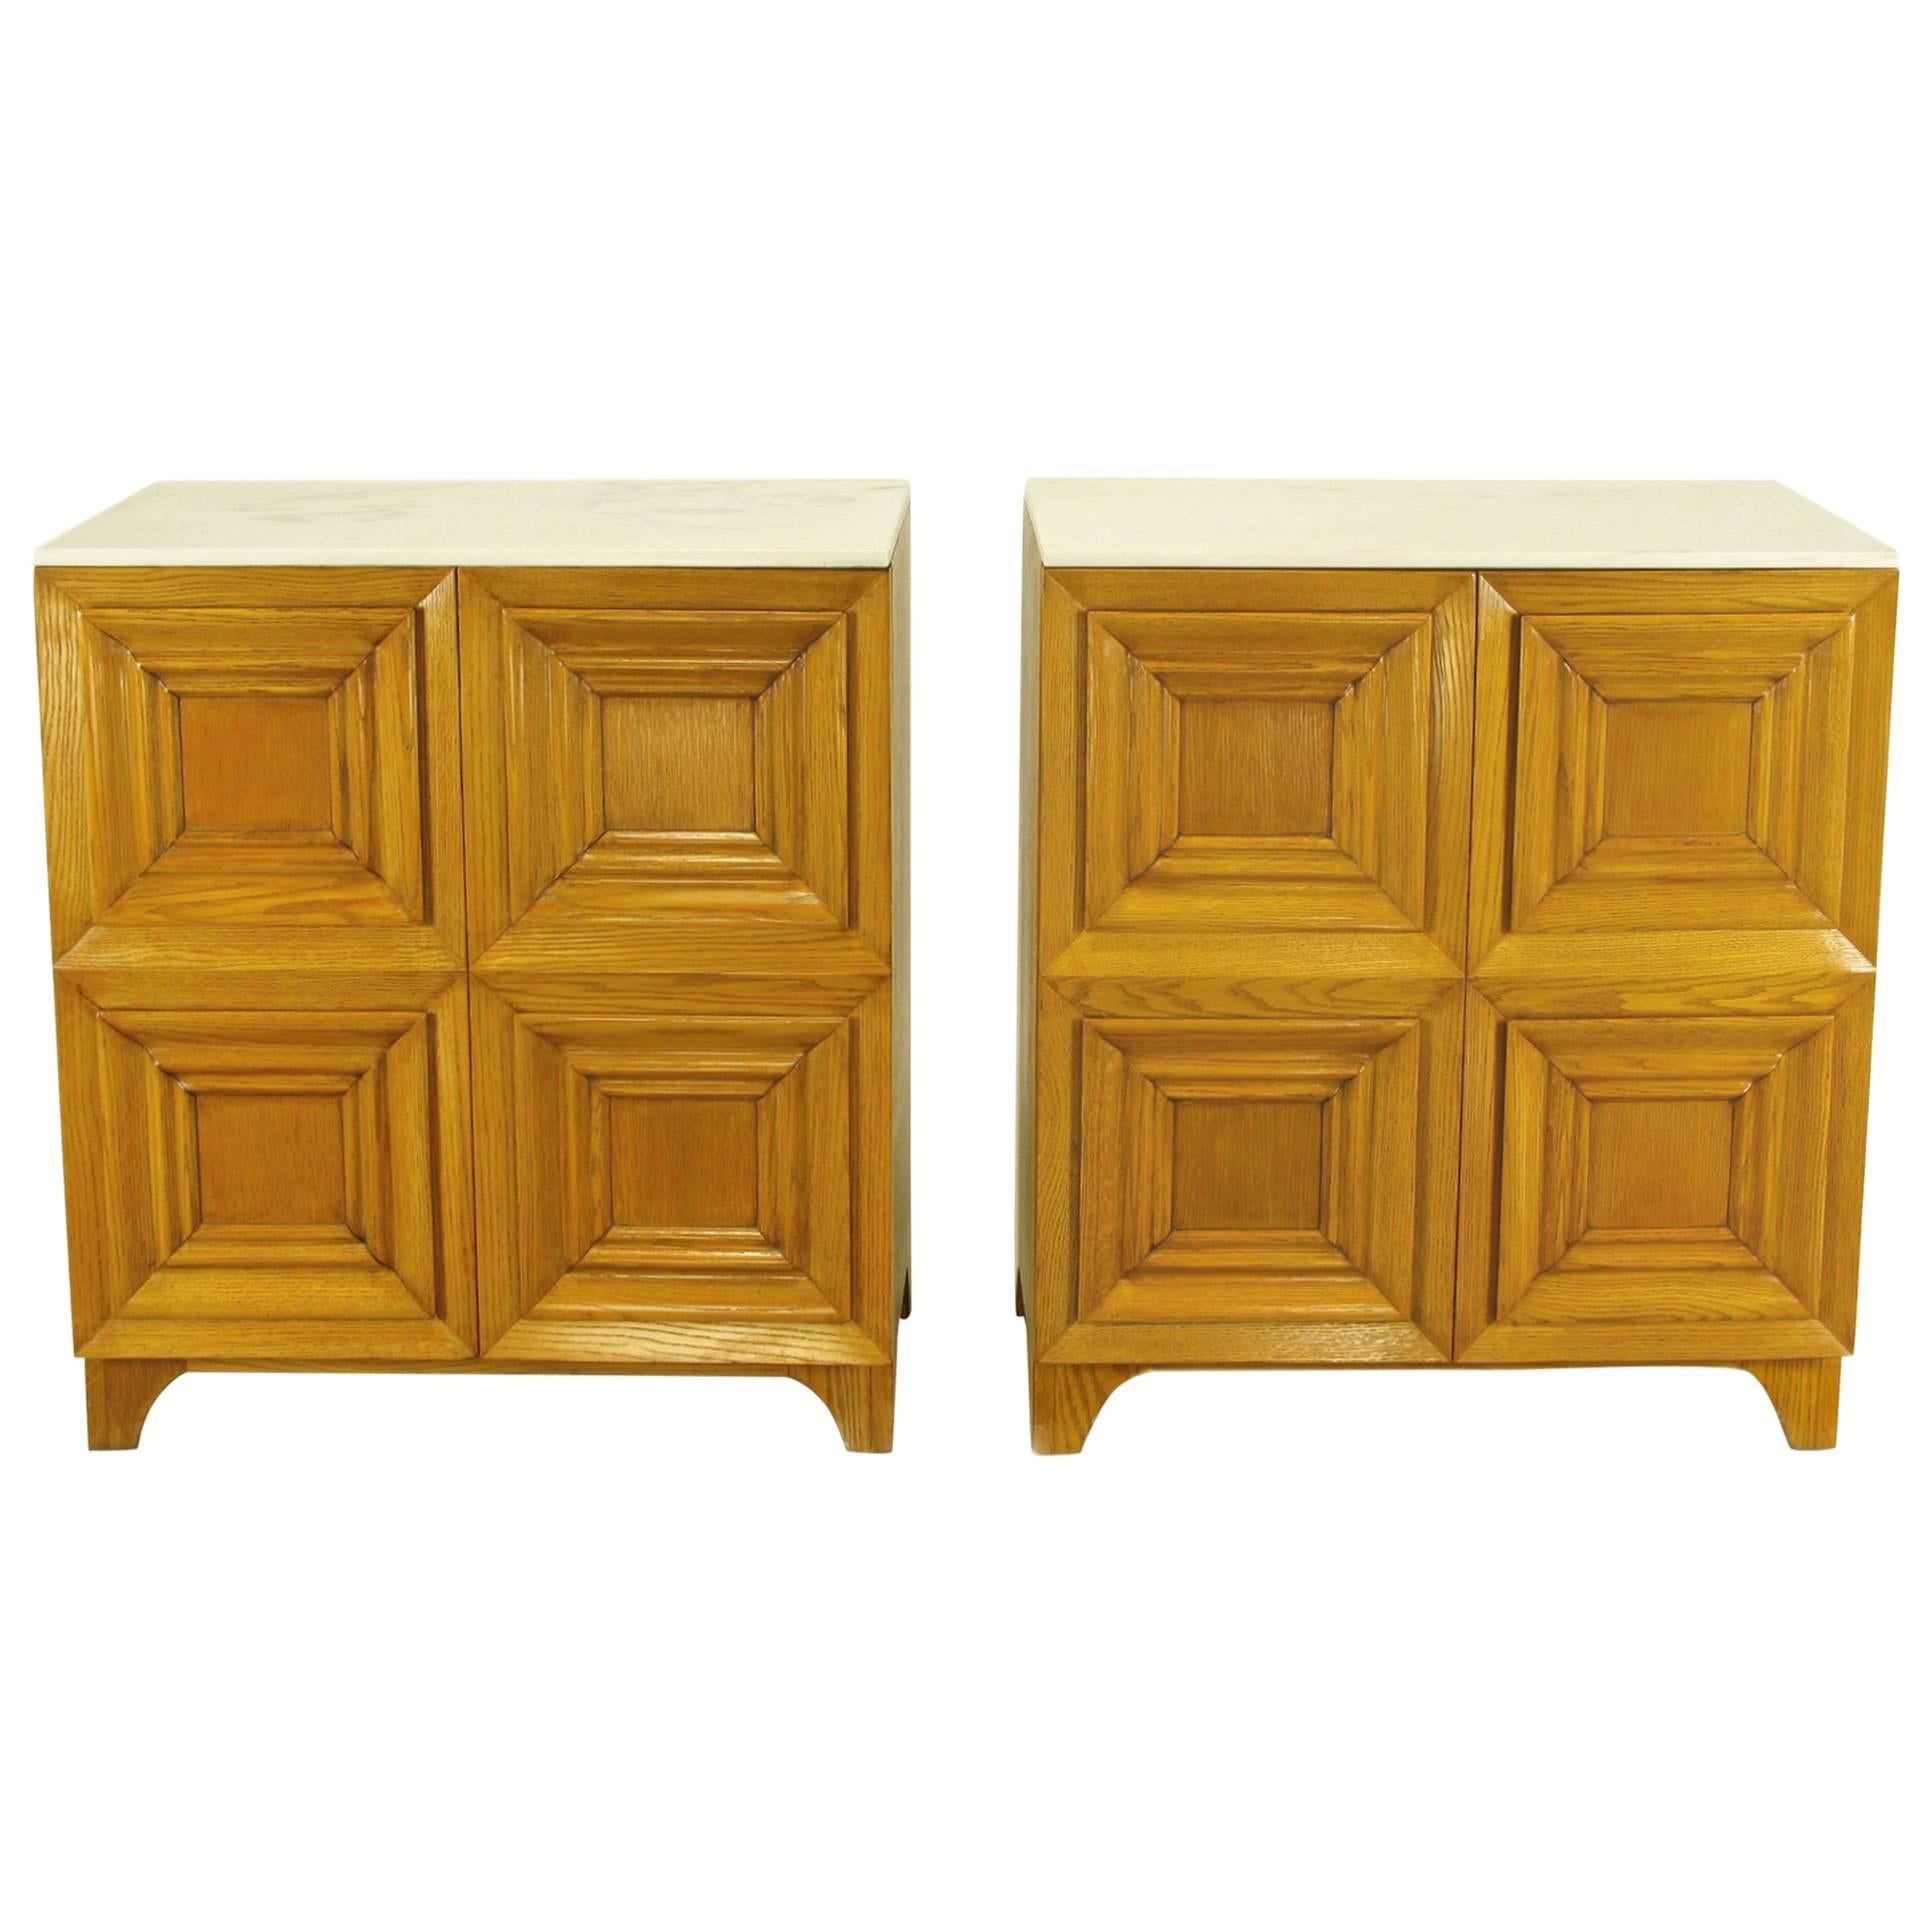 Pair of Solid White Oak Carved Four-Panel Commodes with Carrera Marble Tops